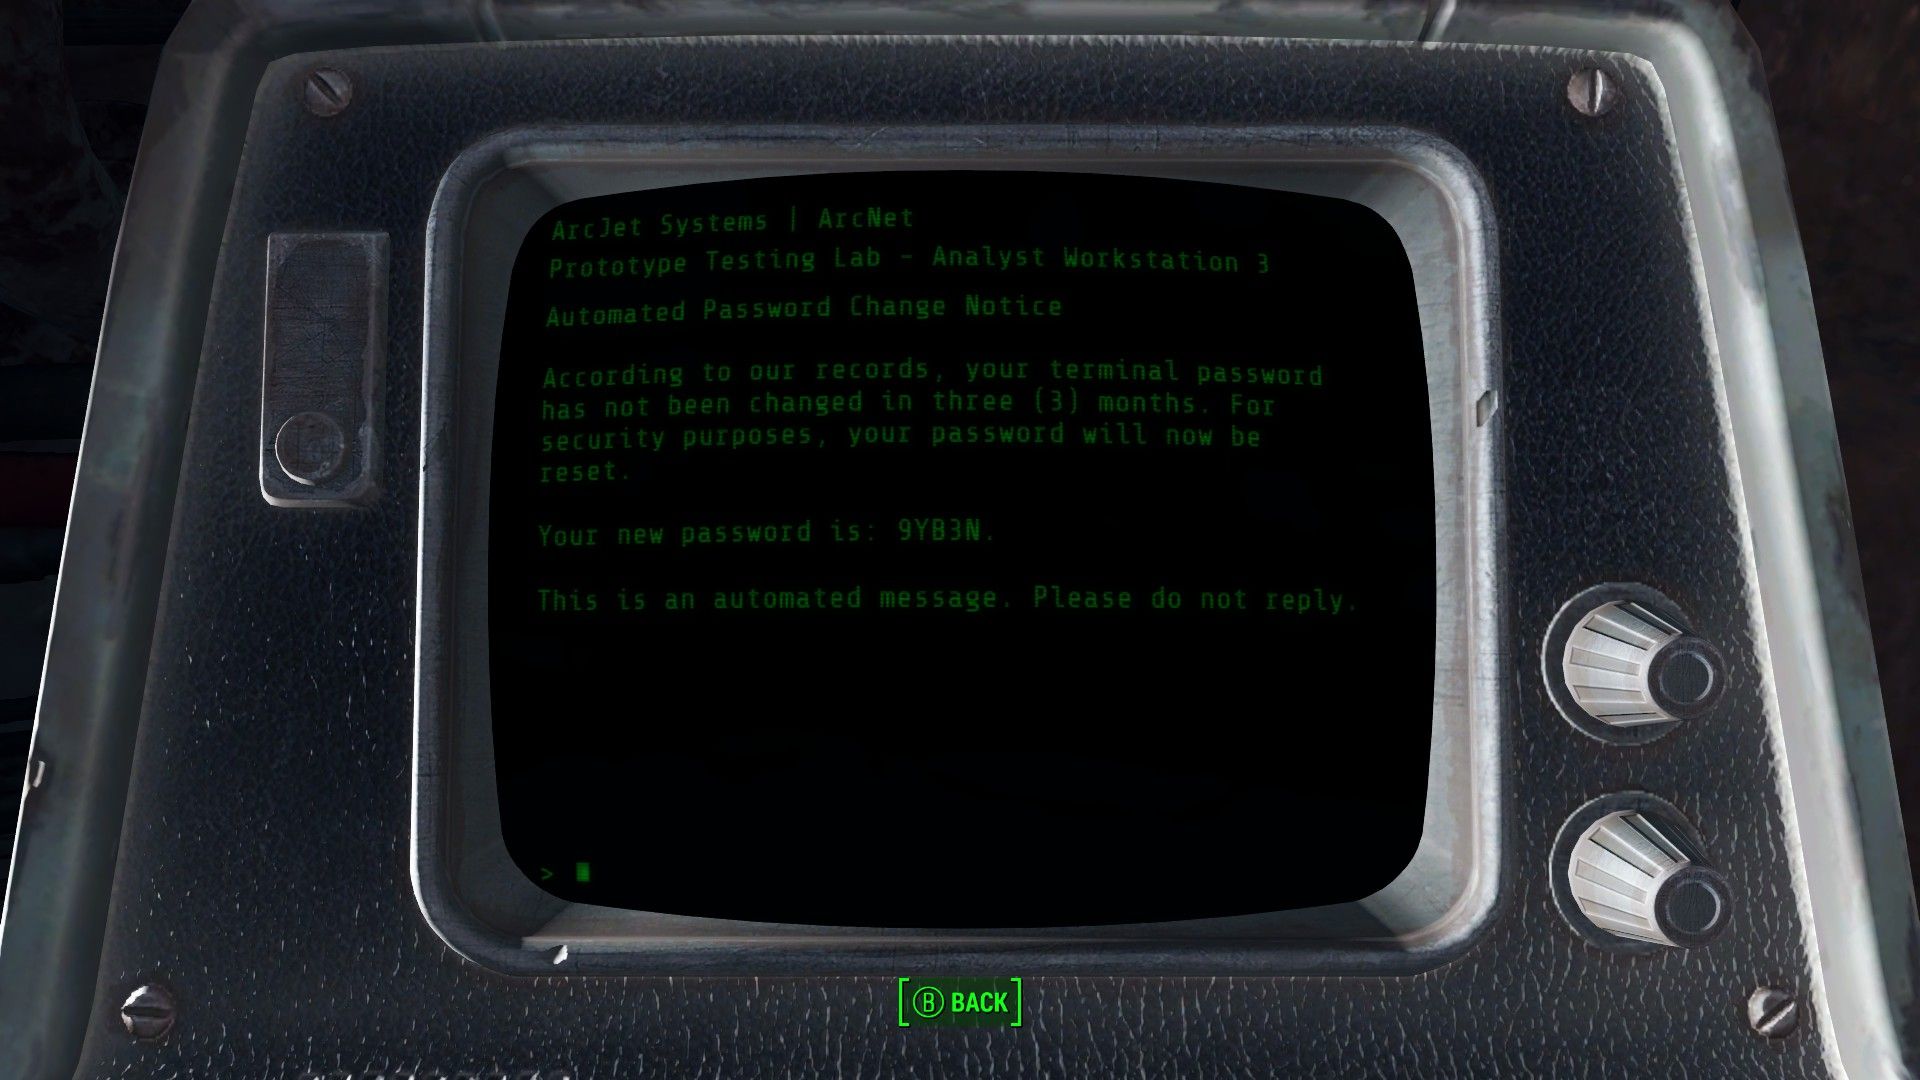 All terminals in fallout 4 фото 59